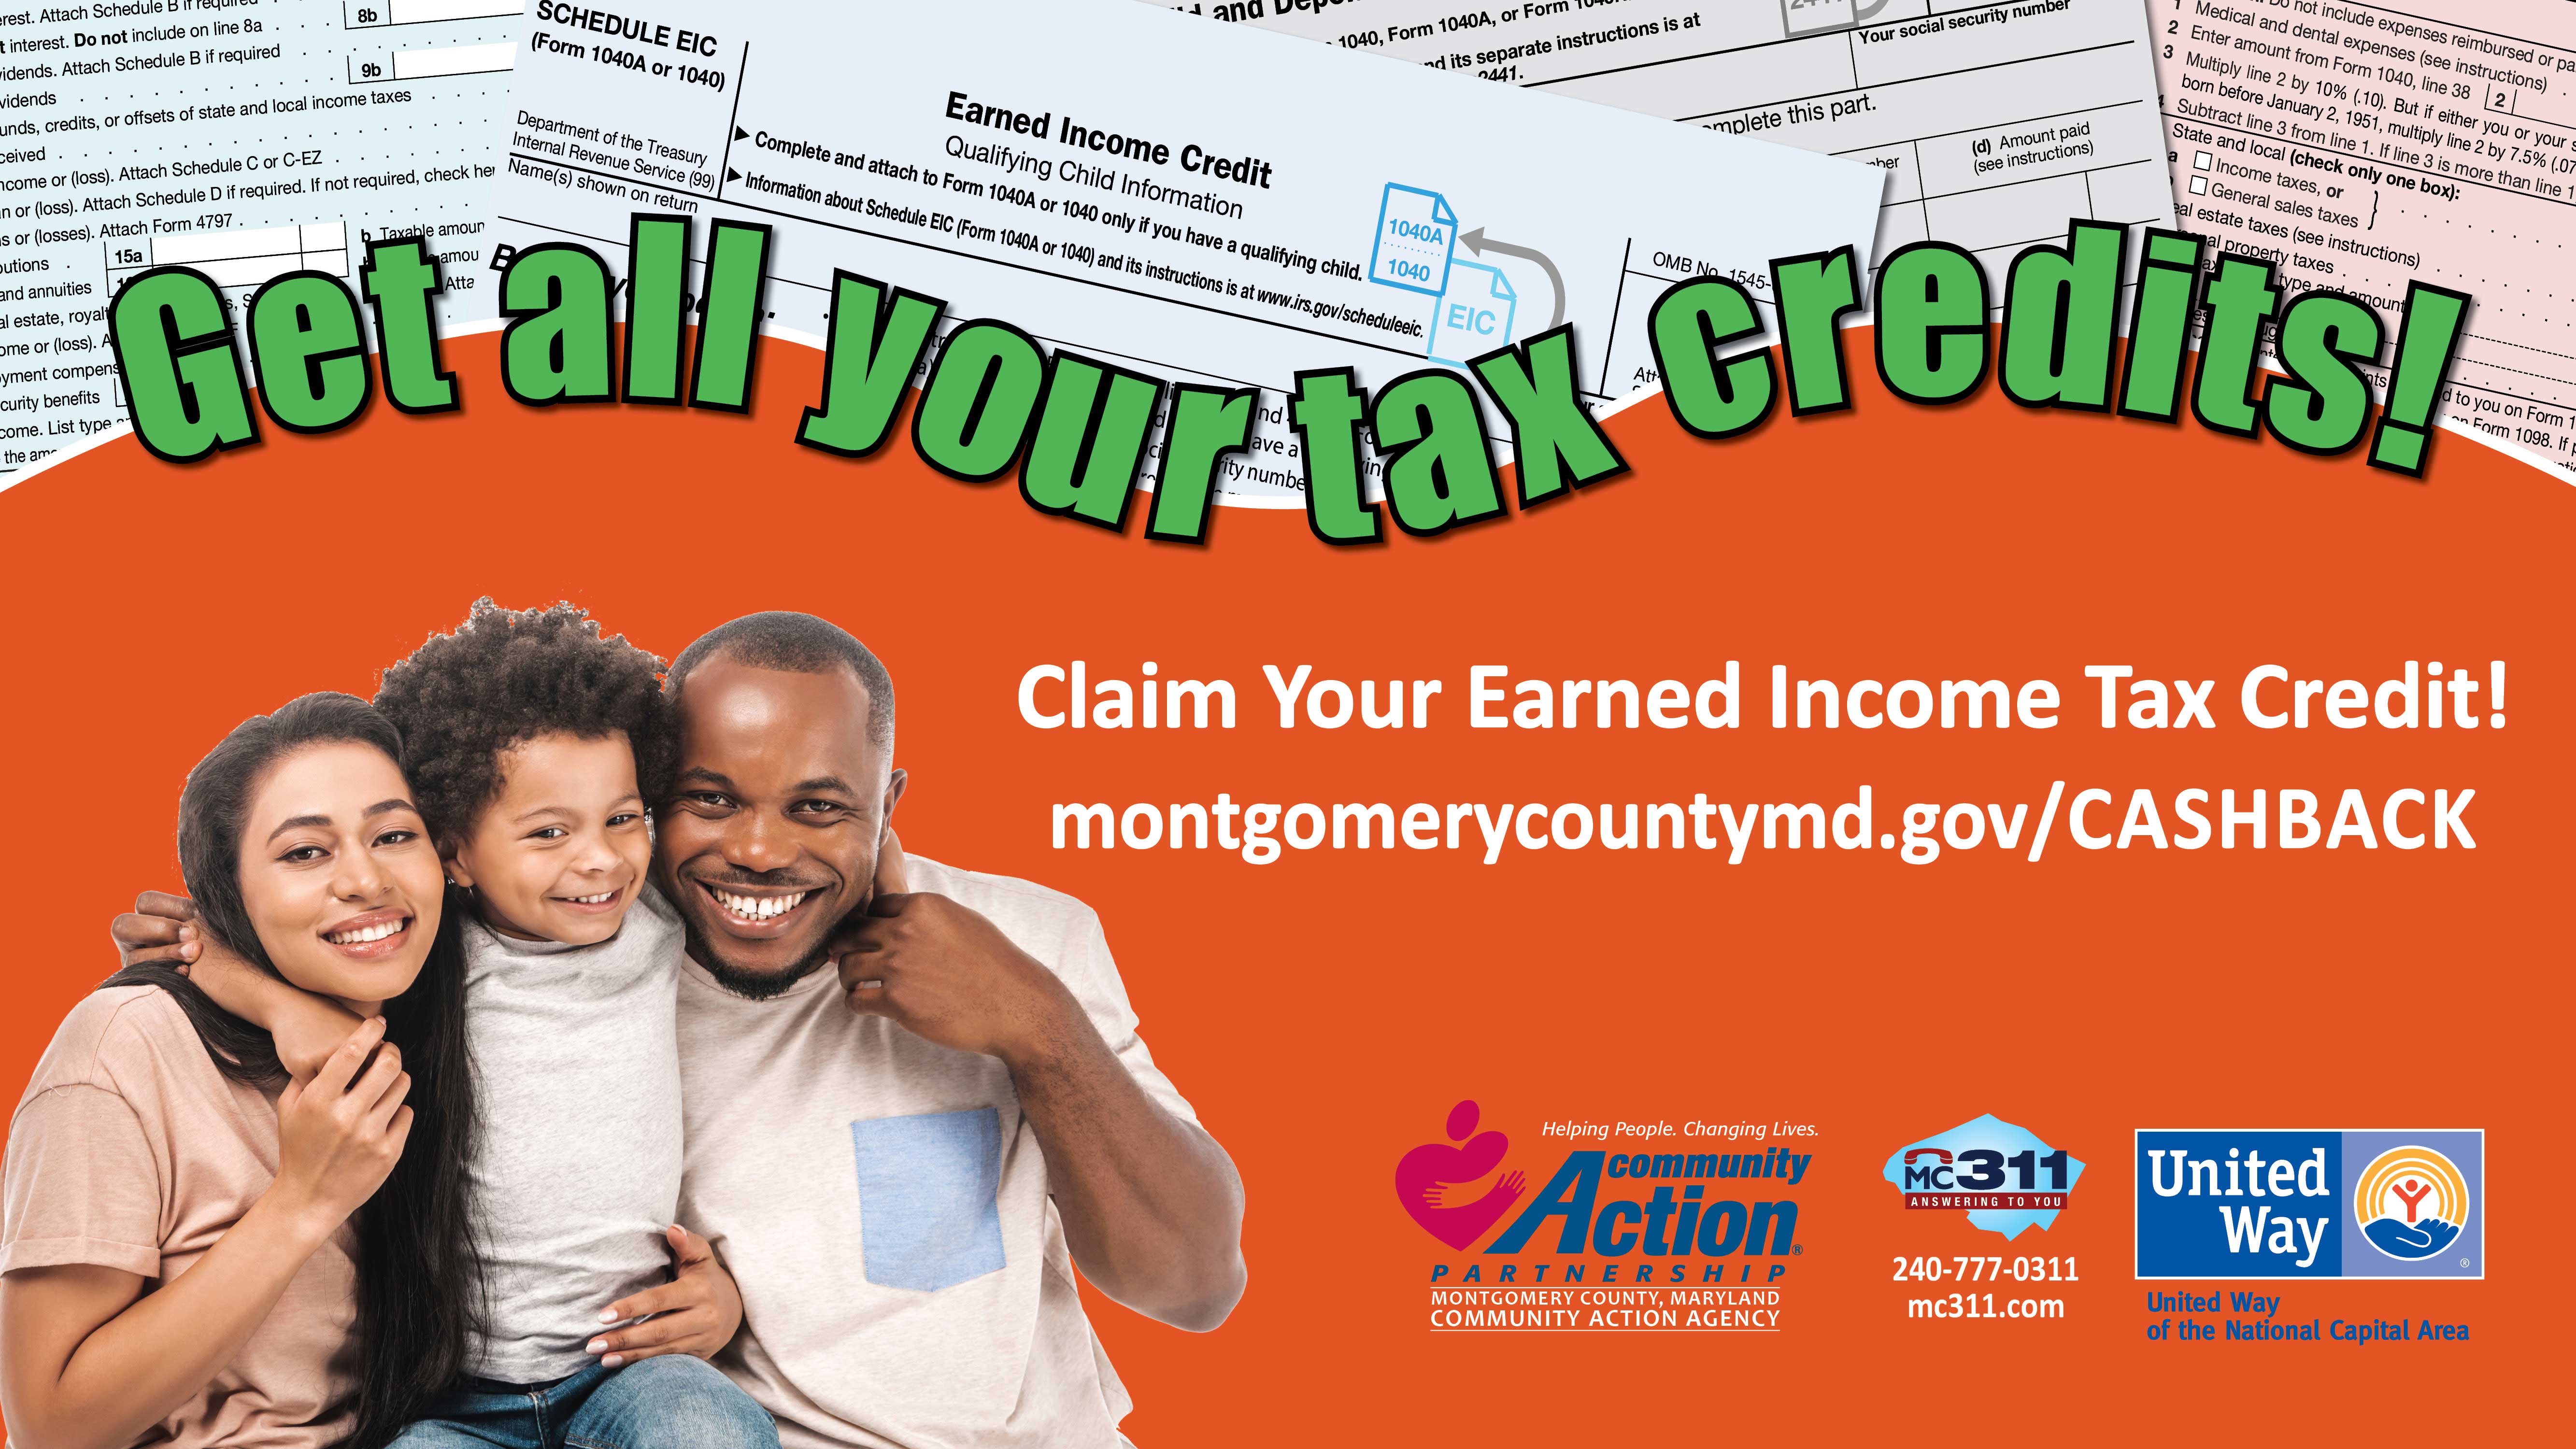 Get All Your Tax Credits!